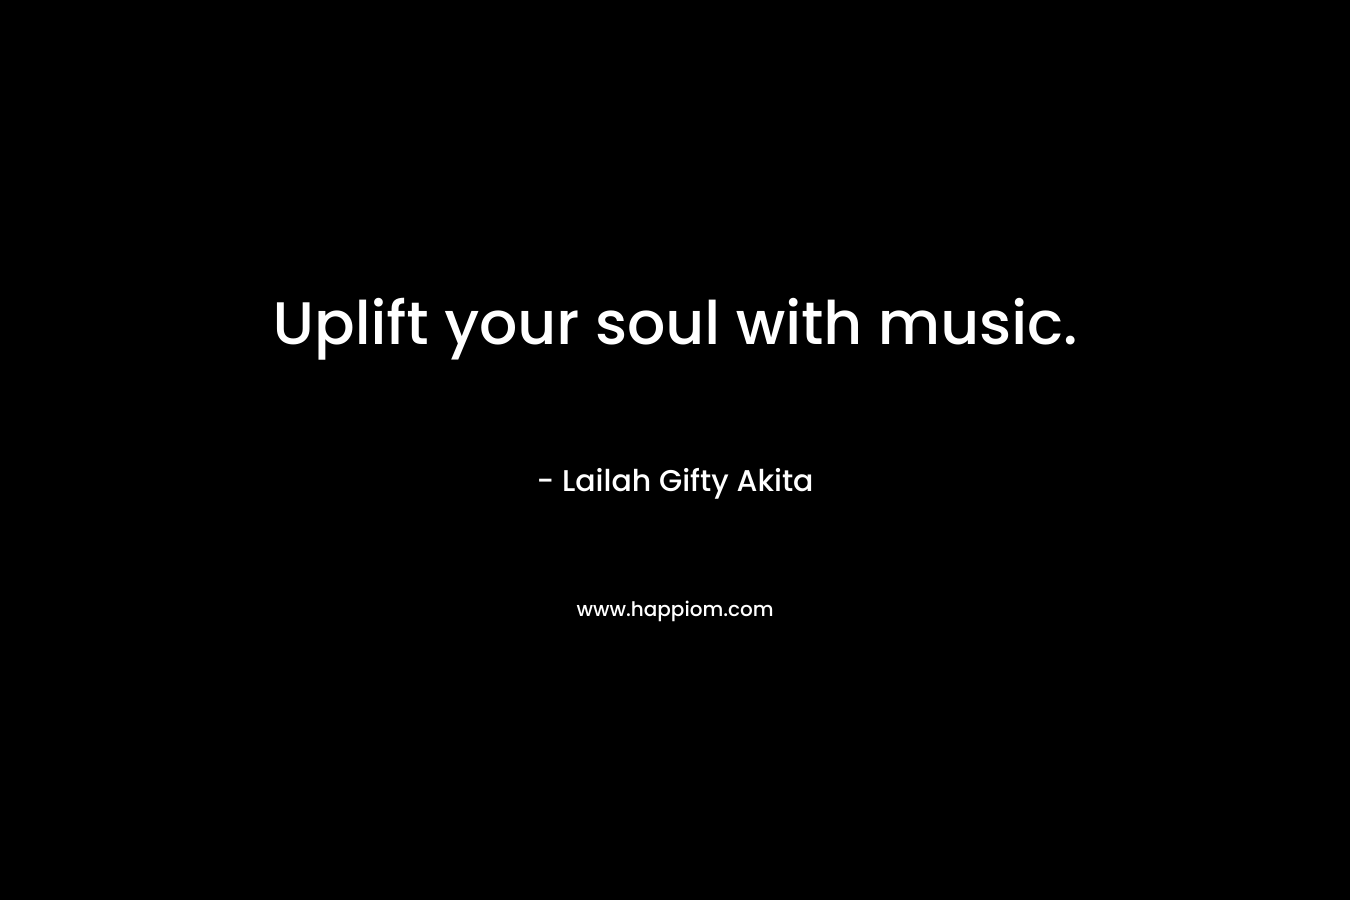 Uplift your soul with music.